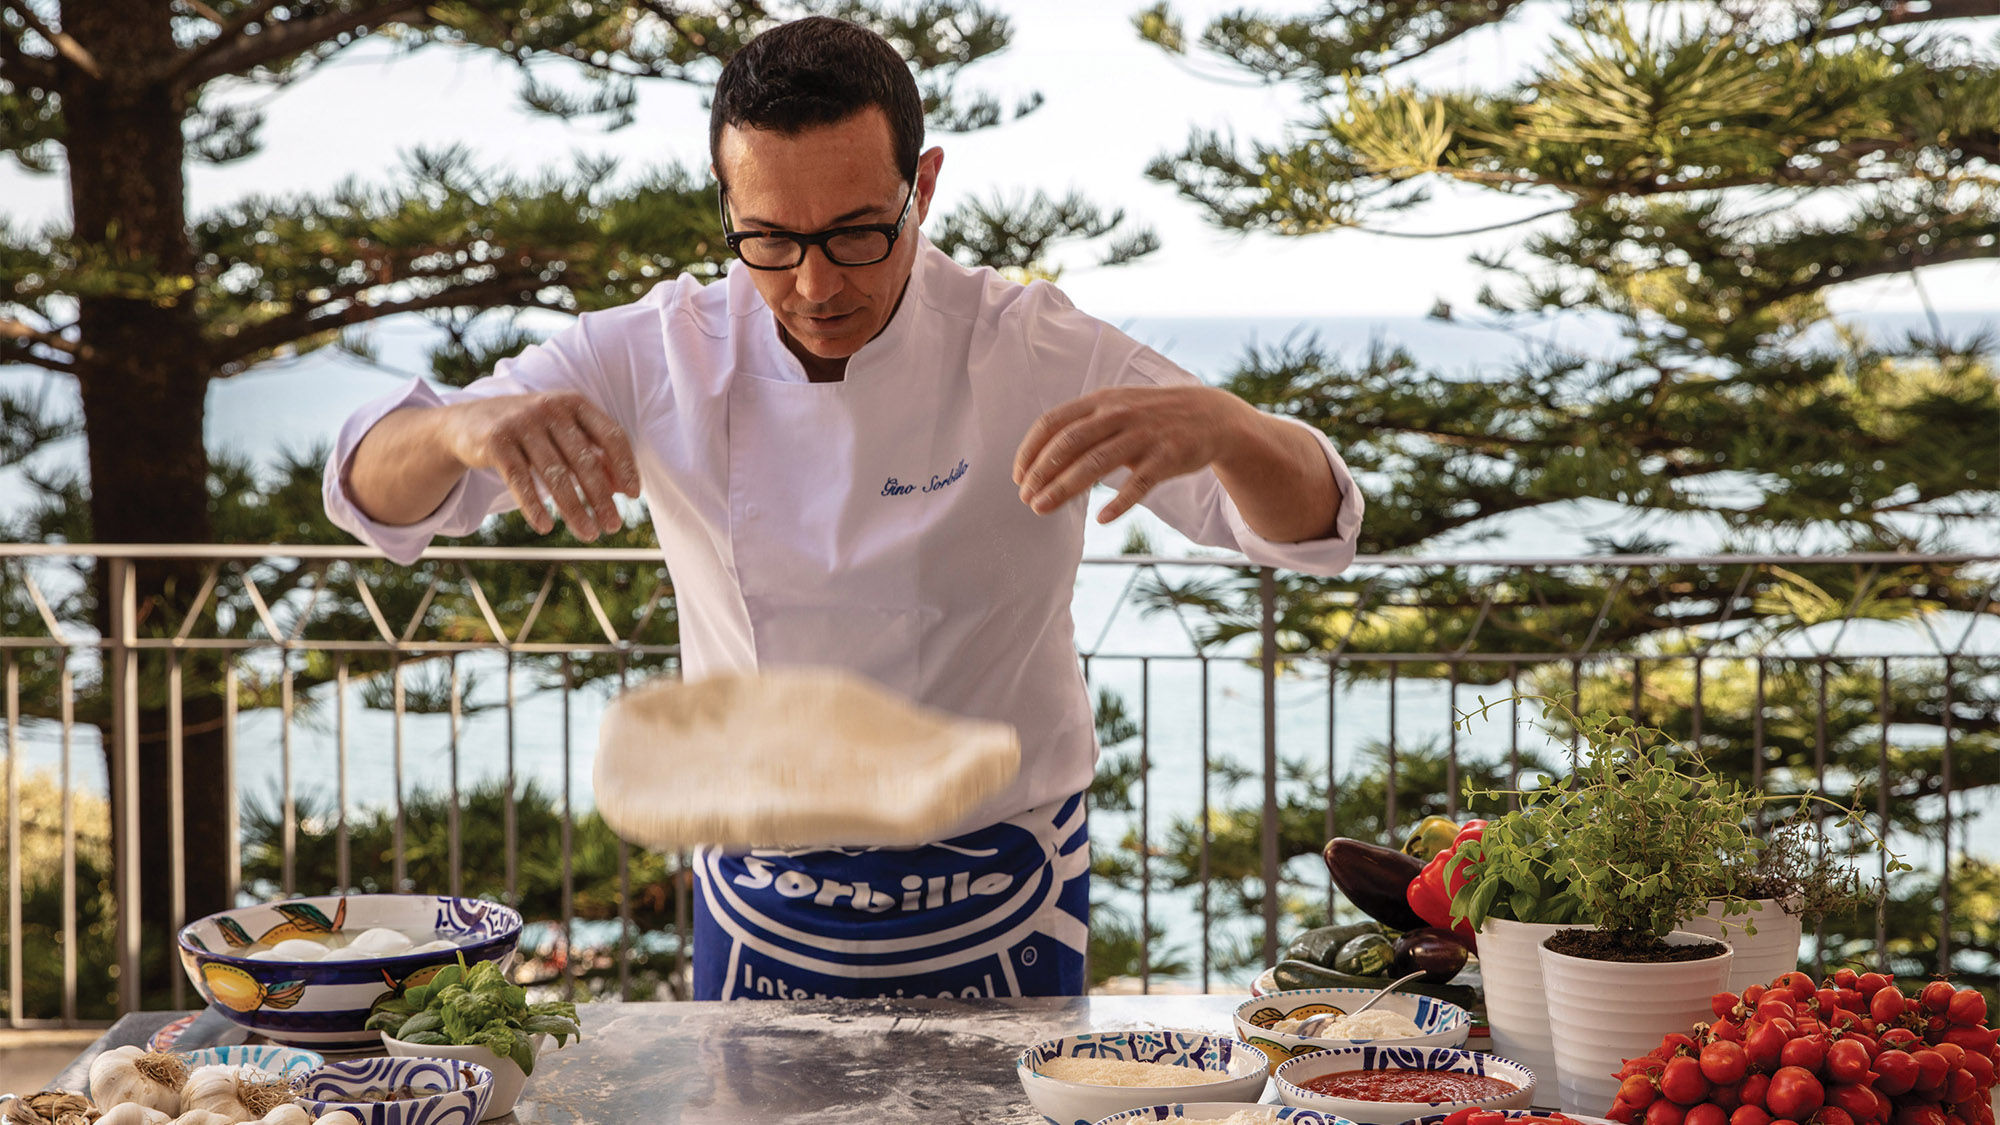 Designated as the Ambassador of Italian Pizza, chef Gino Sorbillo offers pizza-making classes as part of Anantara's Spice Spoons culinary program.